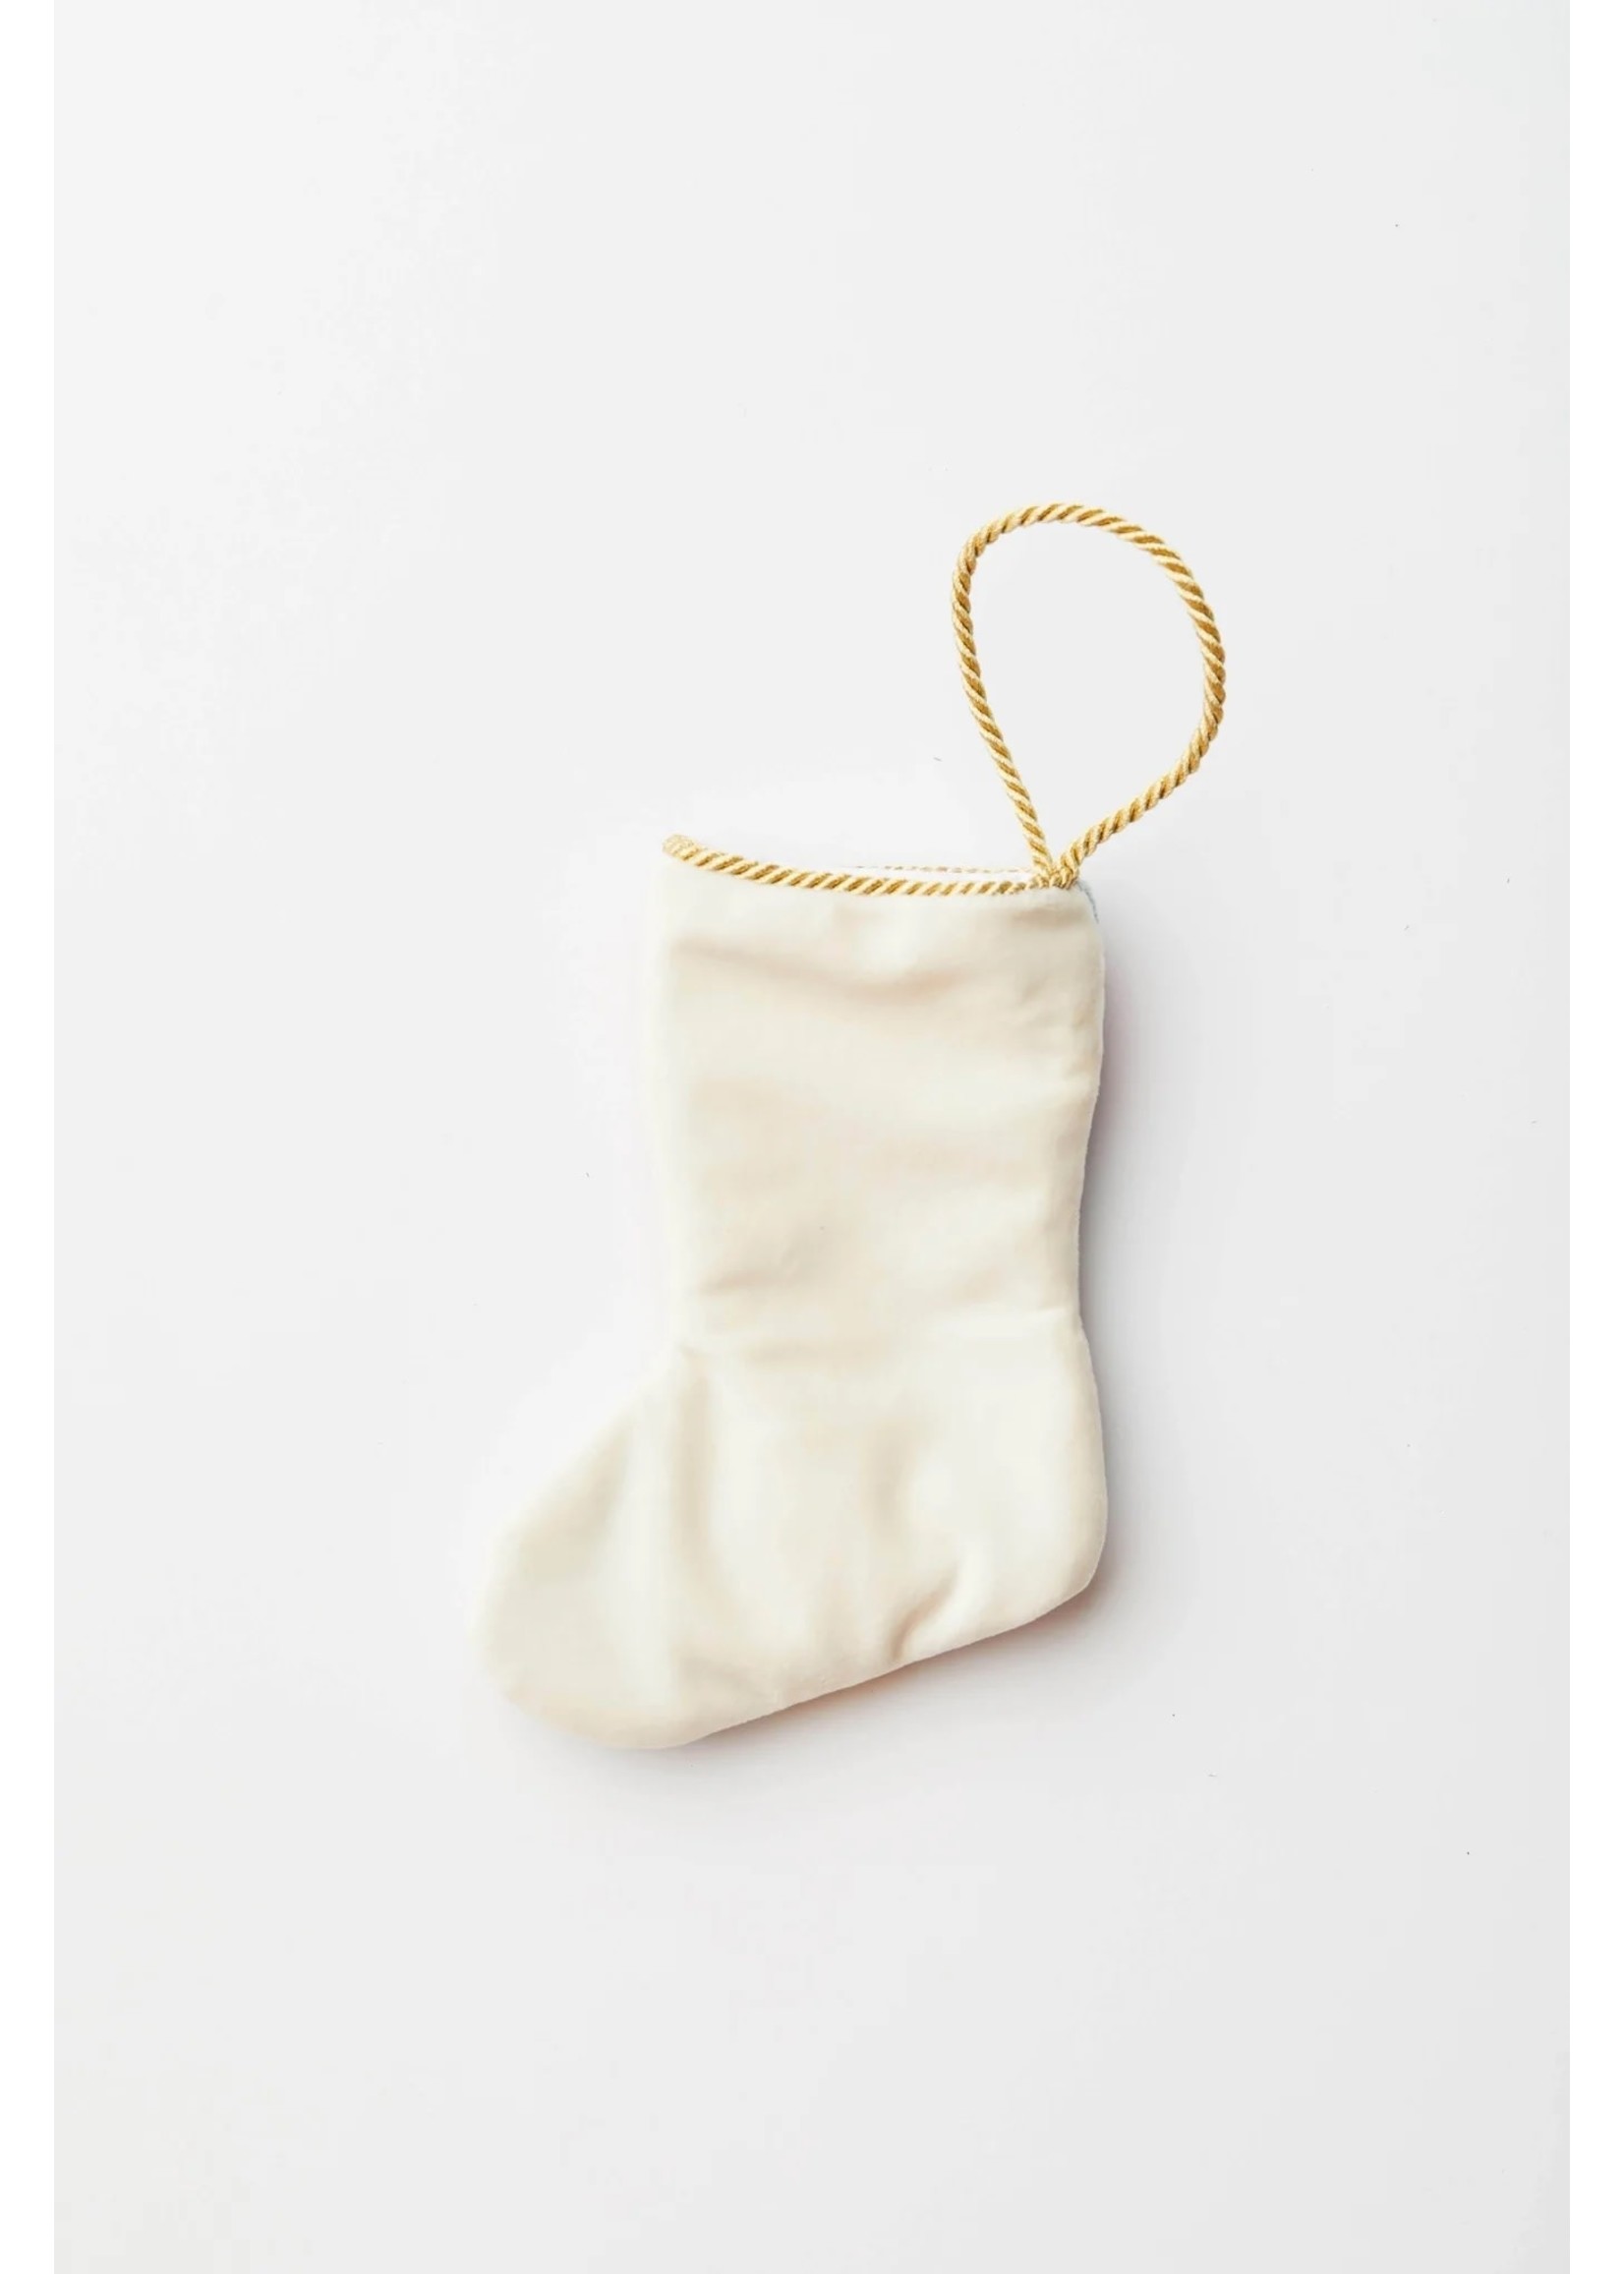 Bauble Stockings Bauble Stocking - Brightly Shining Tree by Shuler Studio